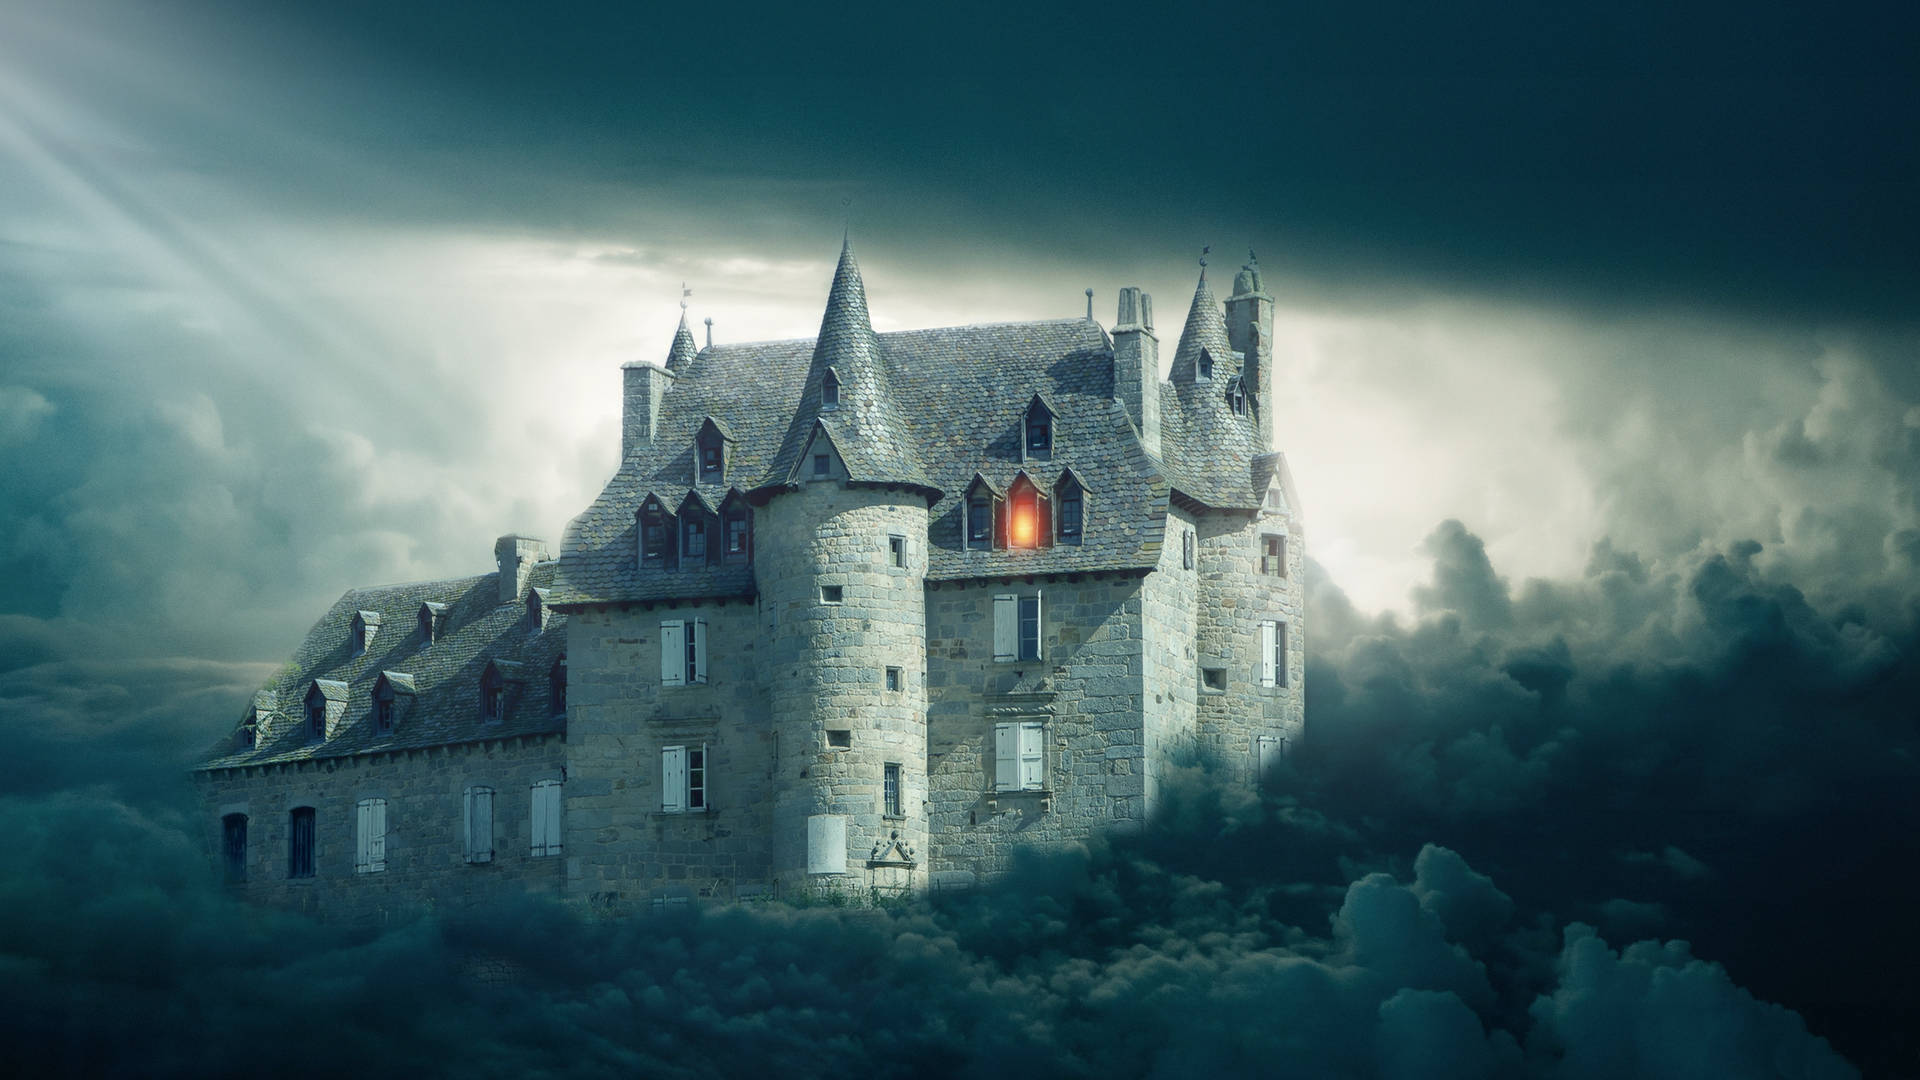 A Gloomy and Mystical Castle Surrounded By Clouds Wallpaper